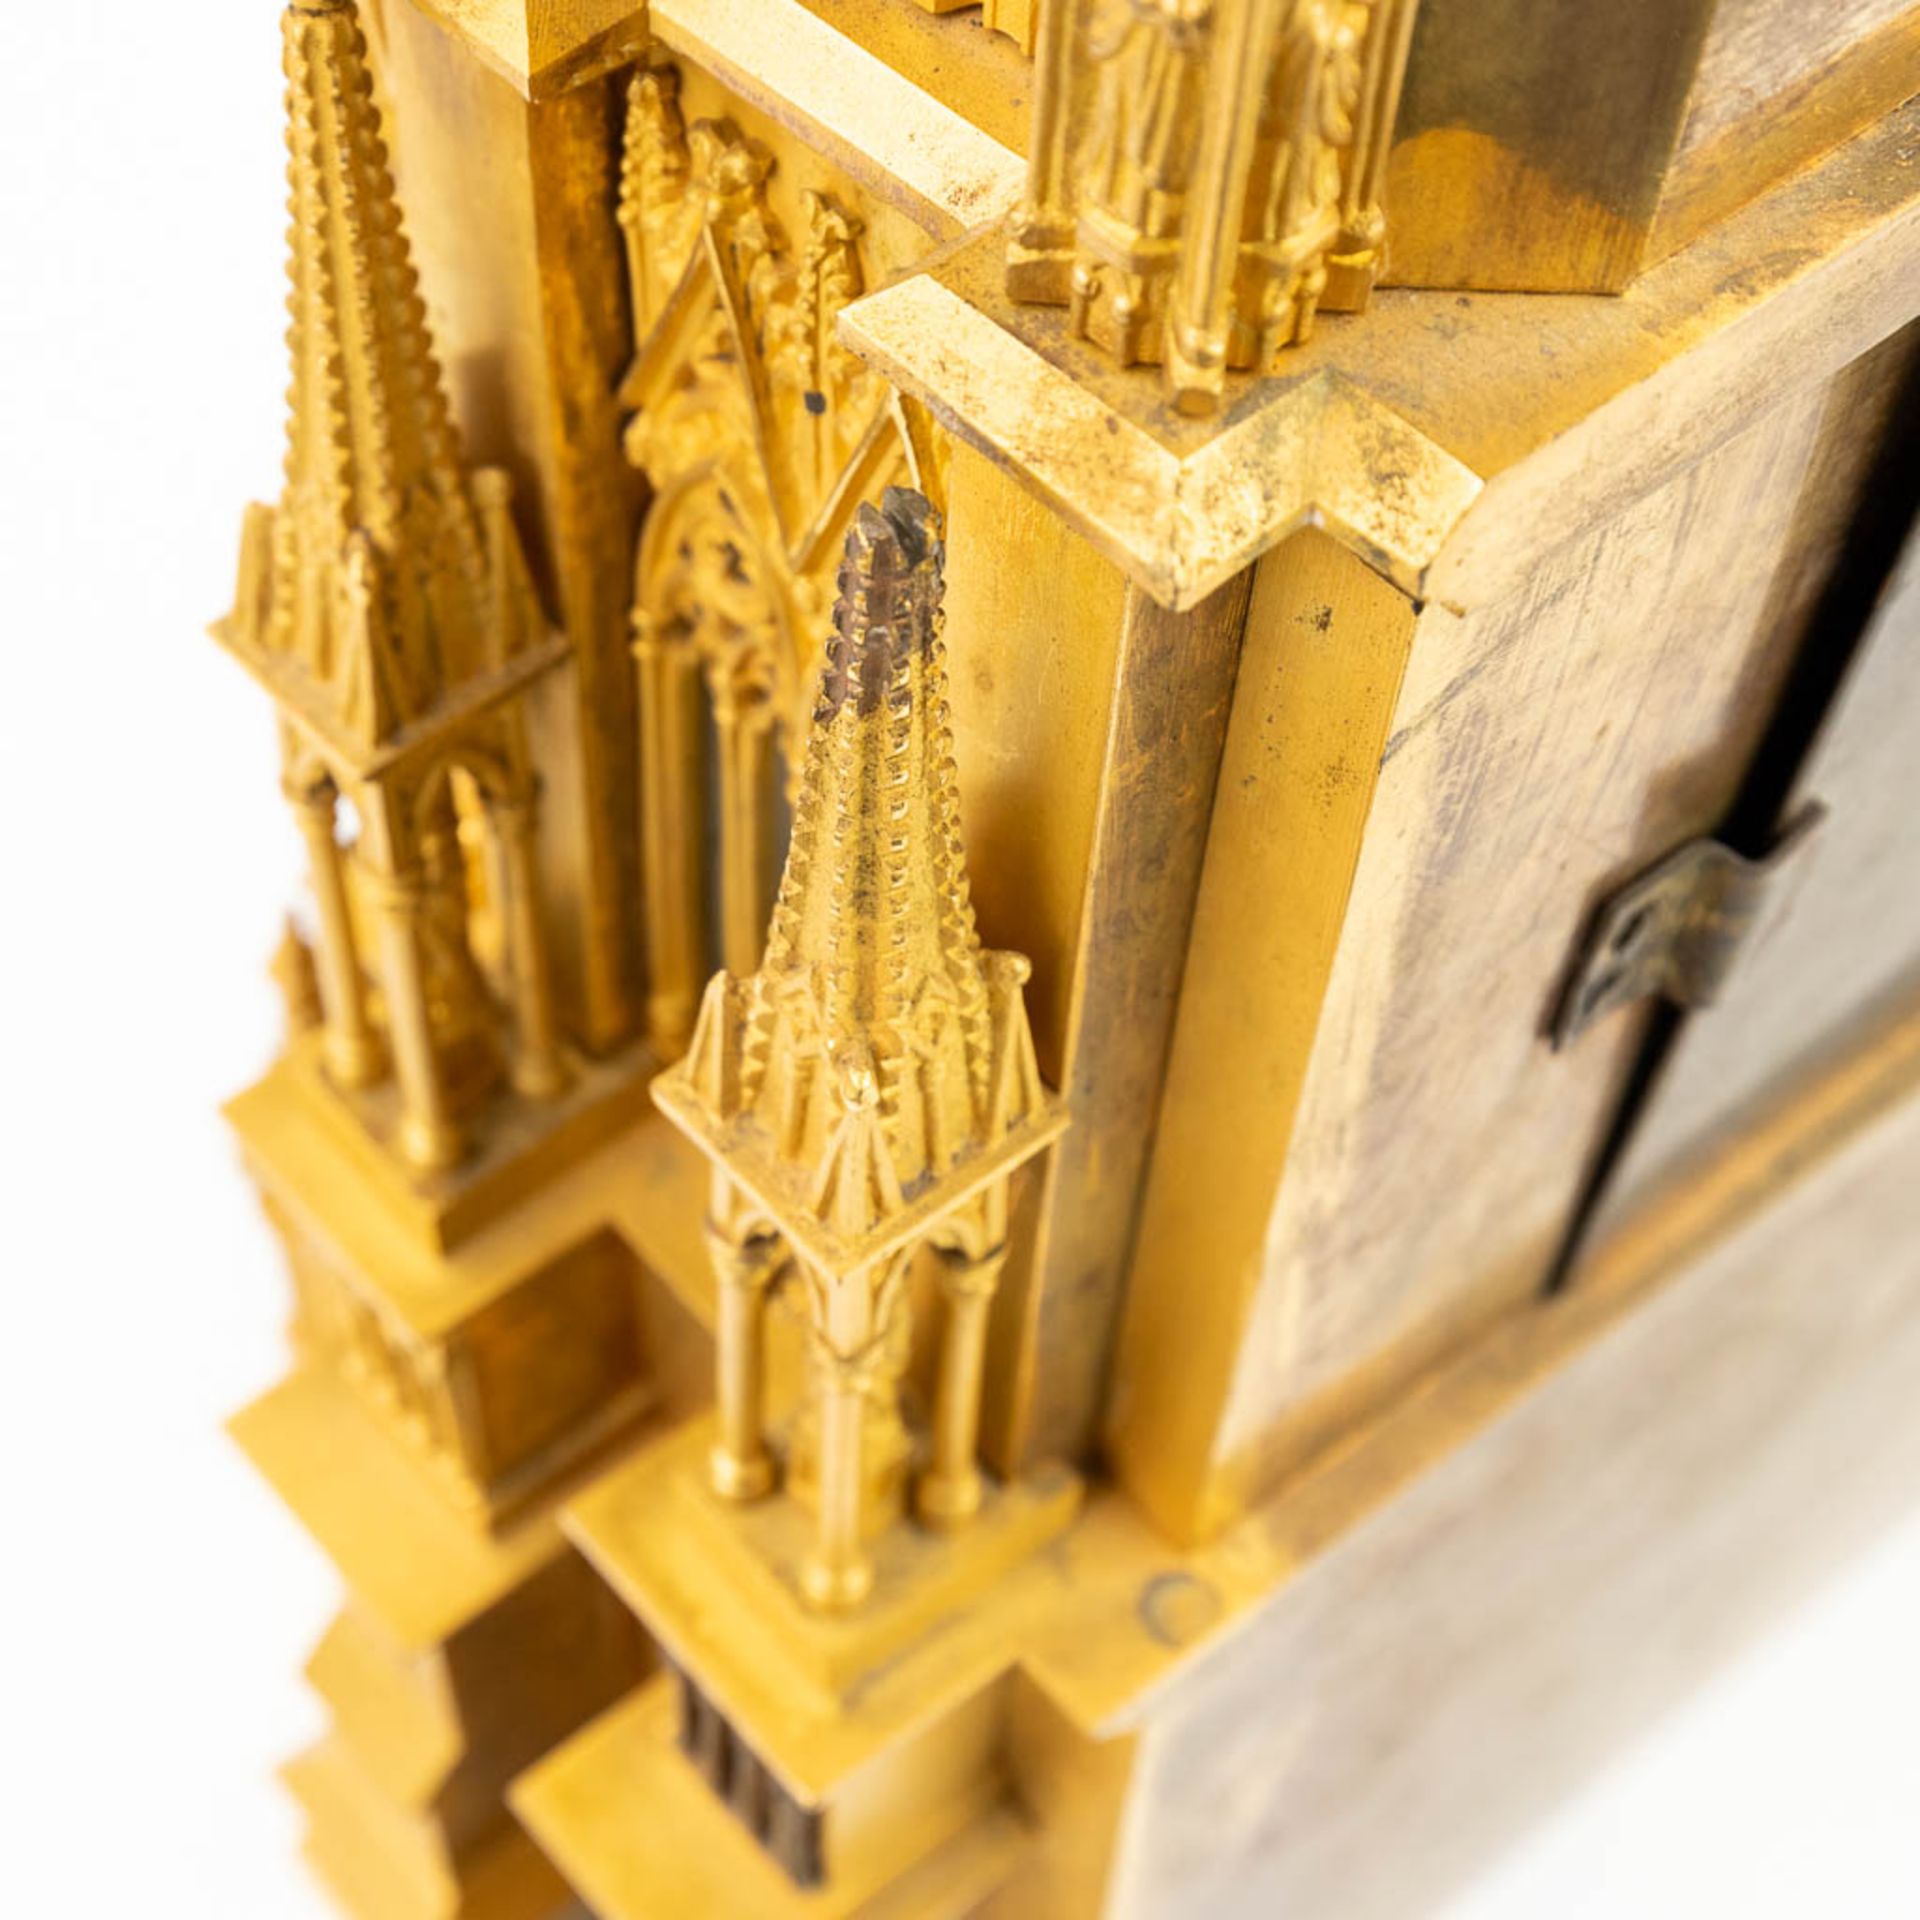 Cathedrale de Reims, an exceptional mantle clock made of gilt bronze. (15 x 31 x 47cm) - Image 12 of 16